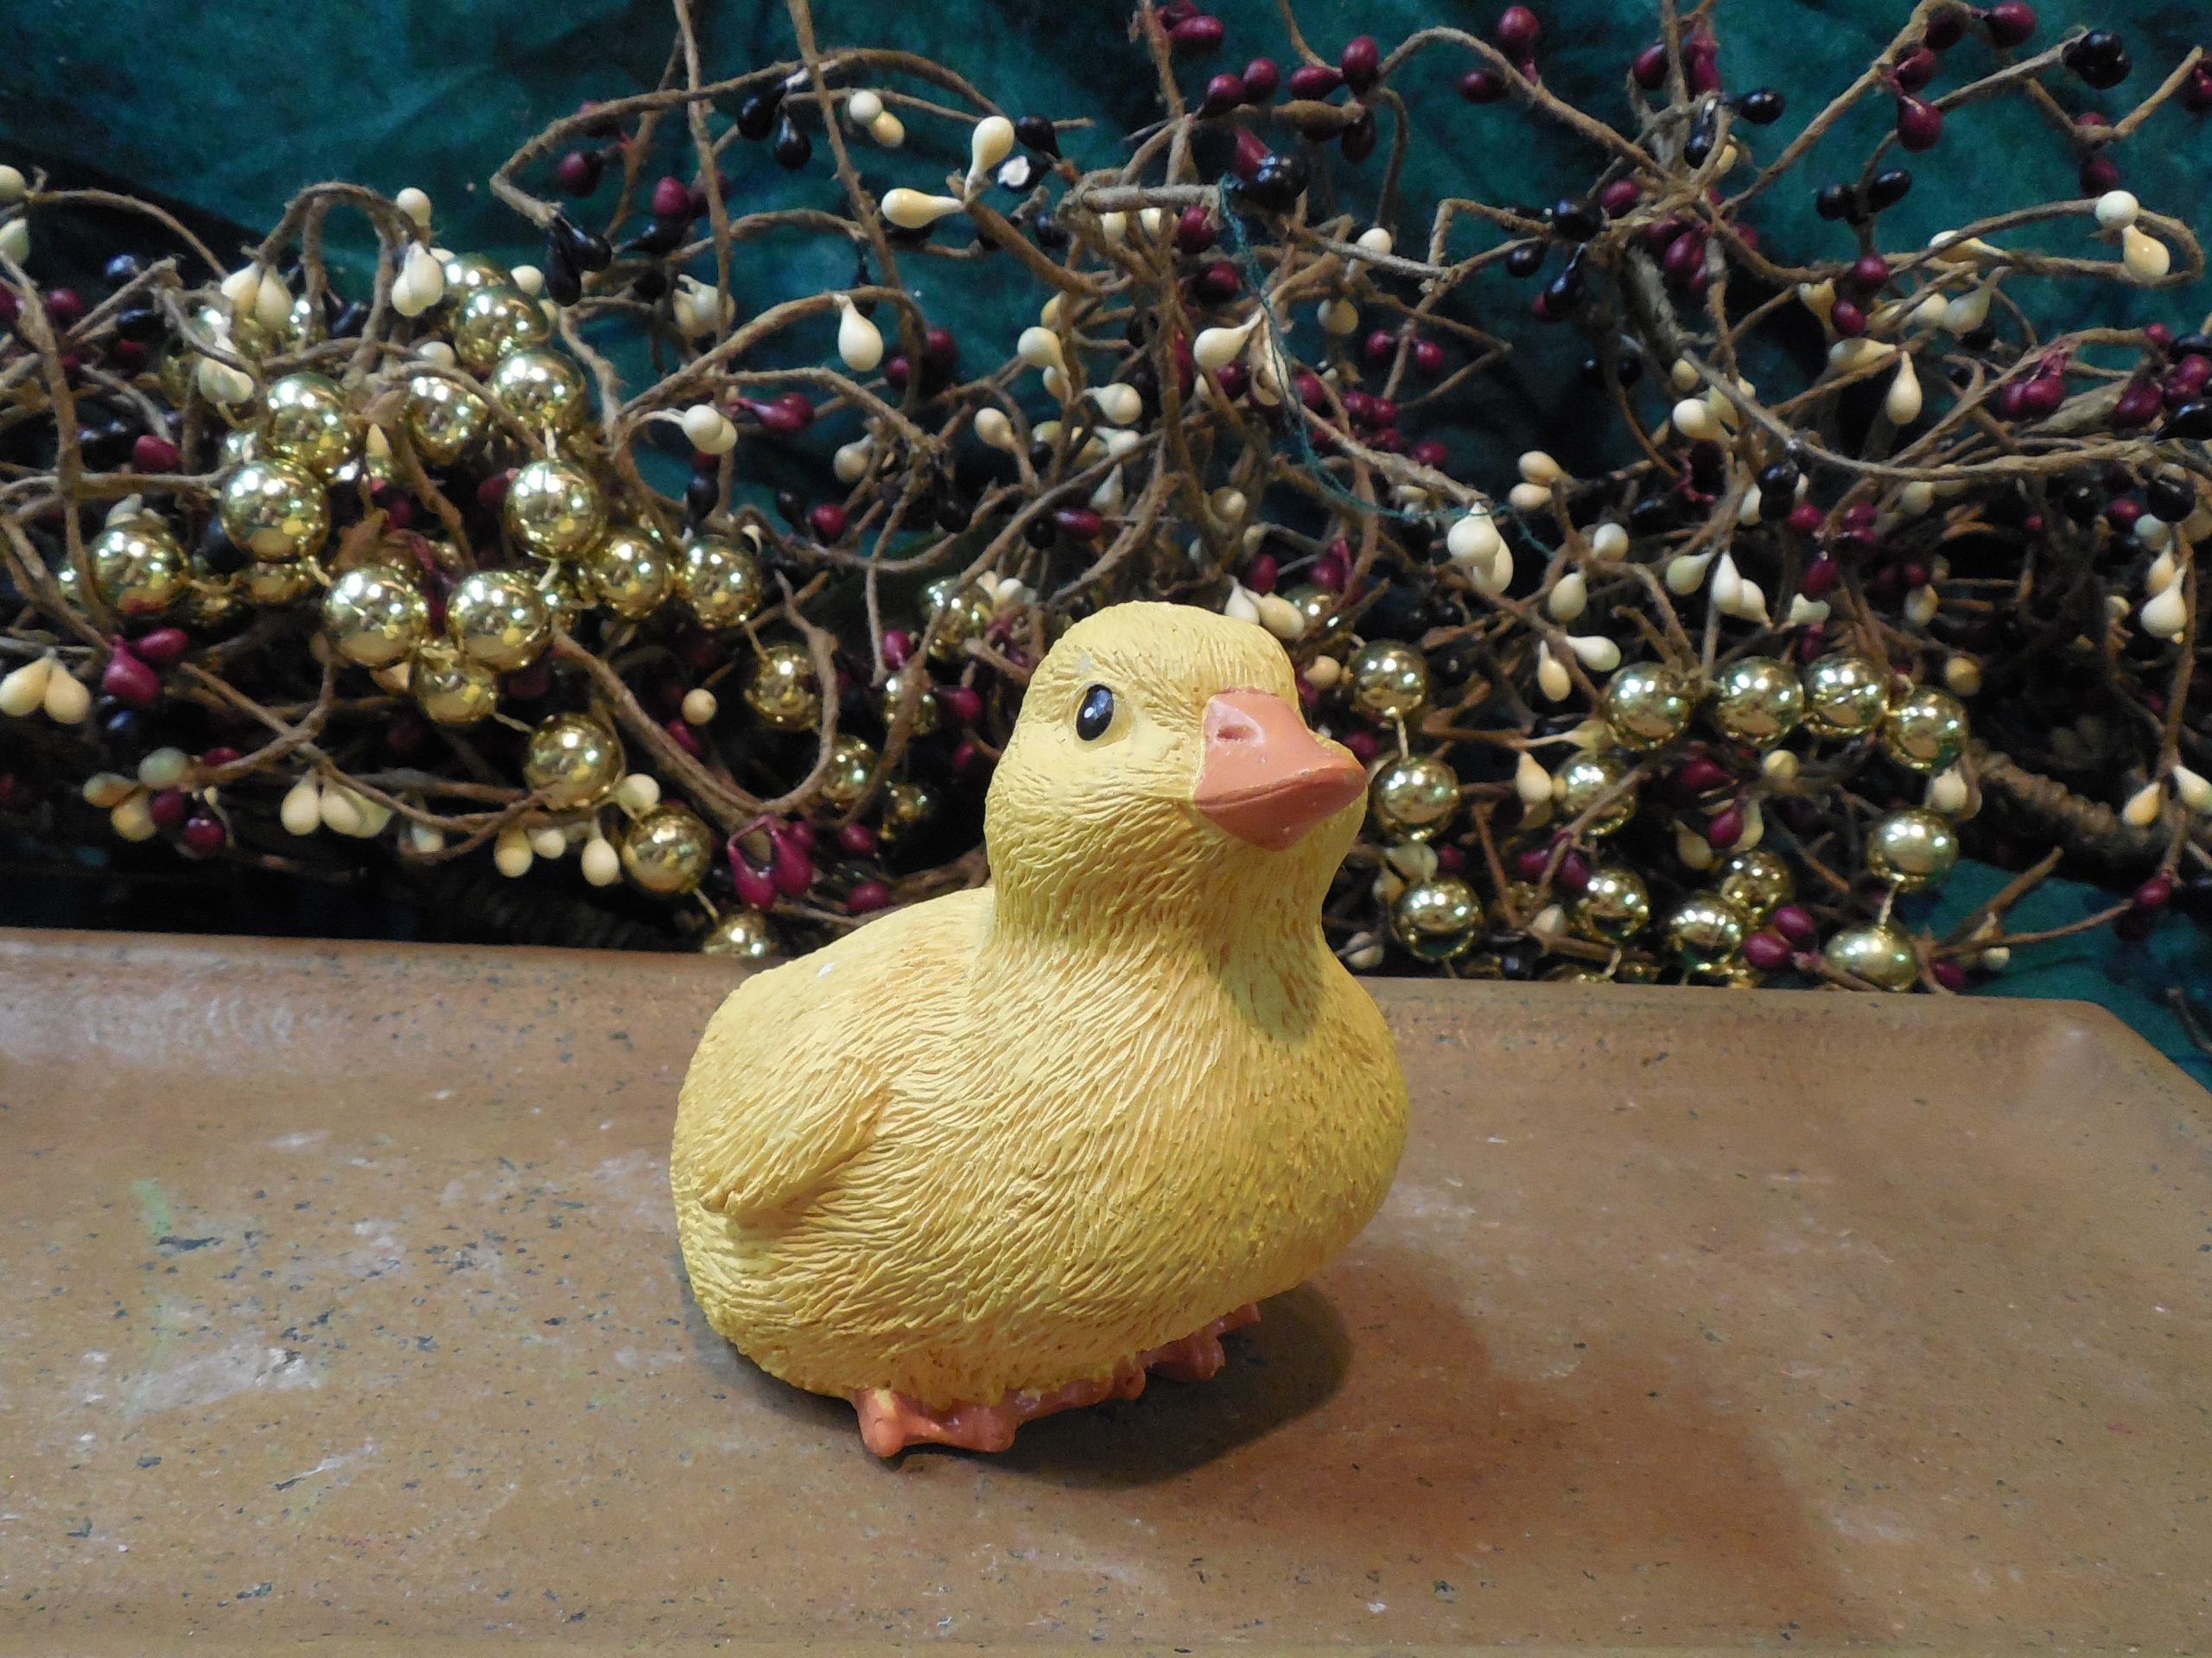 https://www.vanyulay.com/wp-content/uploads/2019/06/Yellow-Duck-Silicone-Mold-1390-scaled.jpg